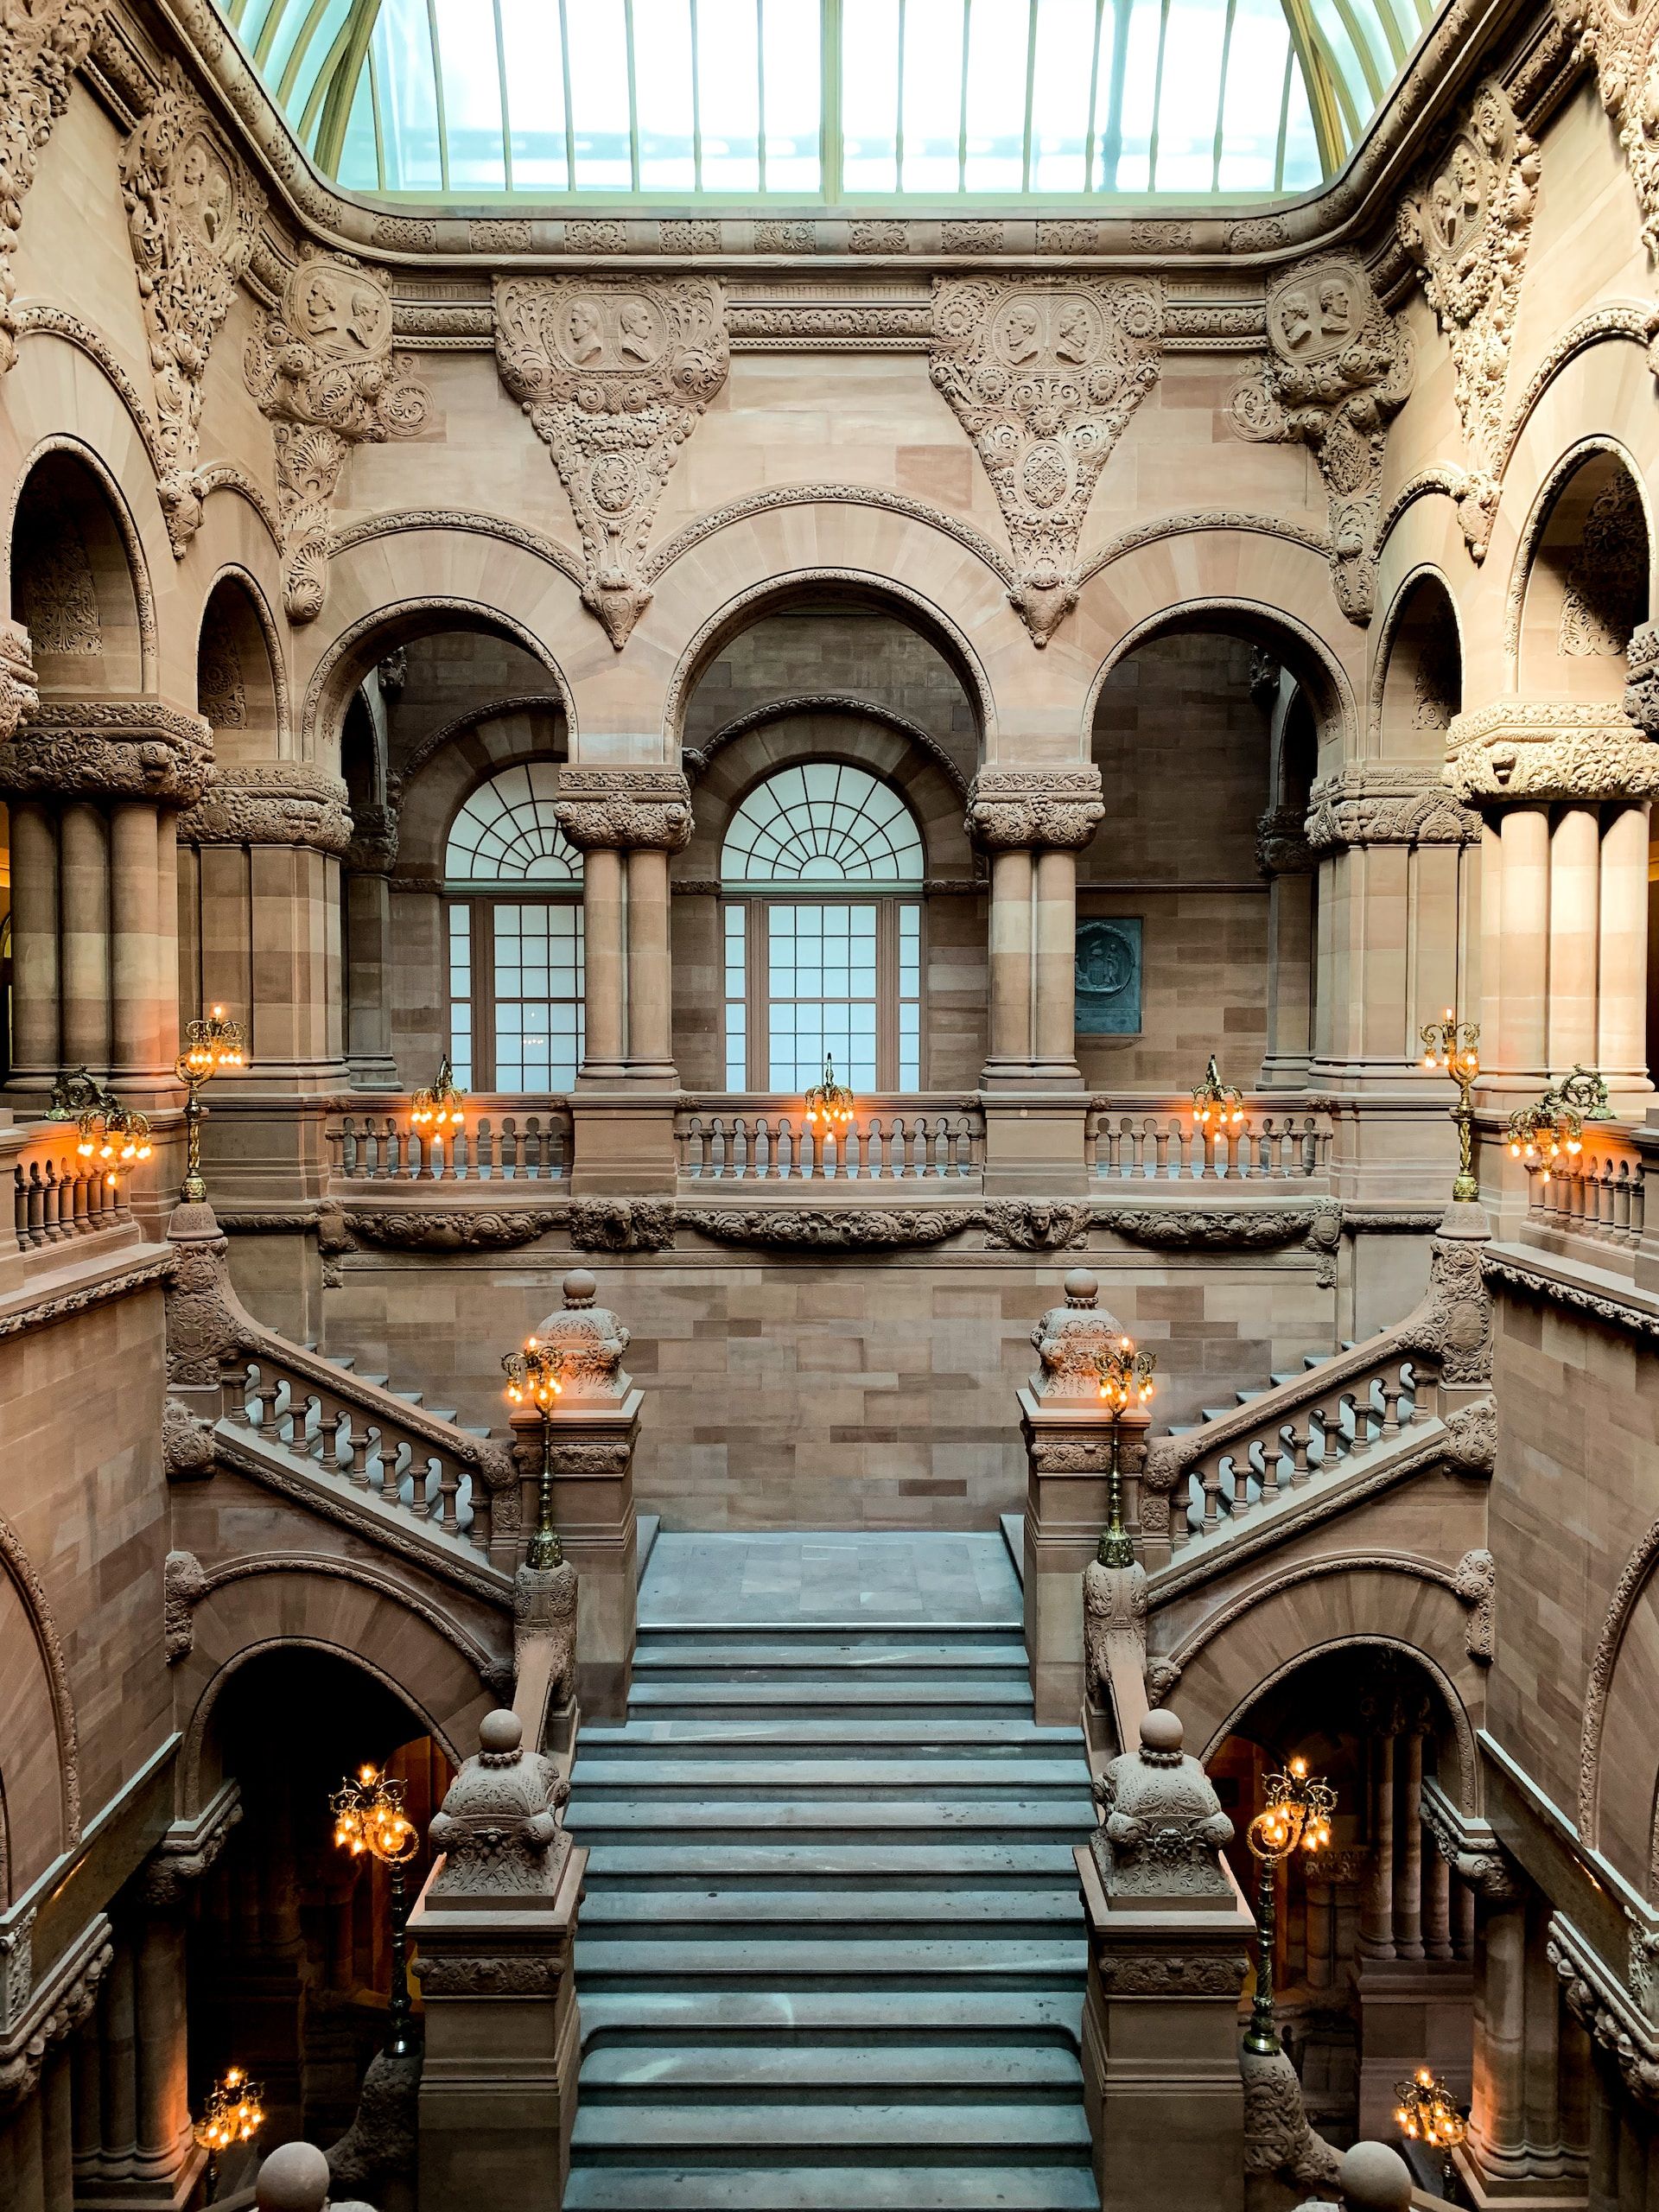 Interior view of the New York State Capitol Building in Albany, New York, USA